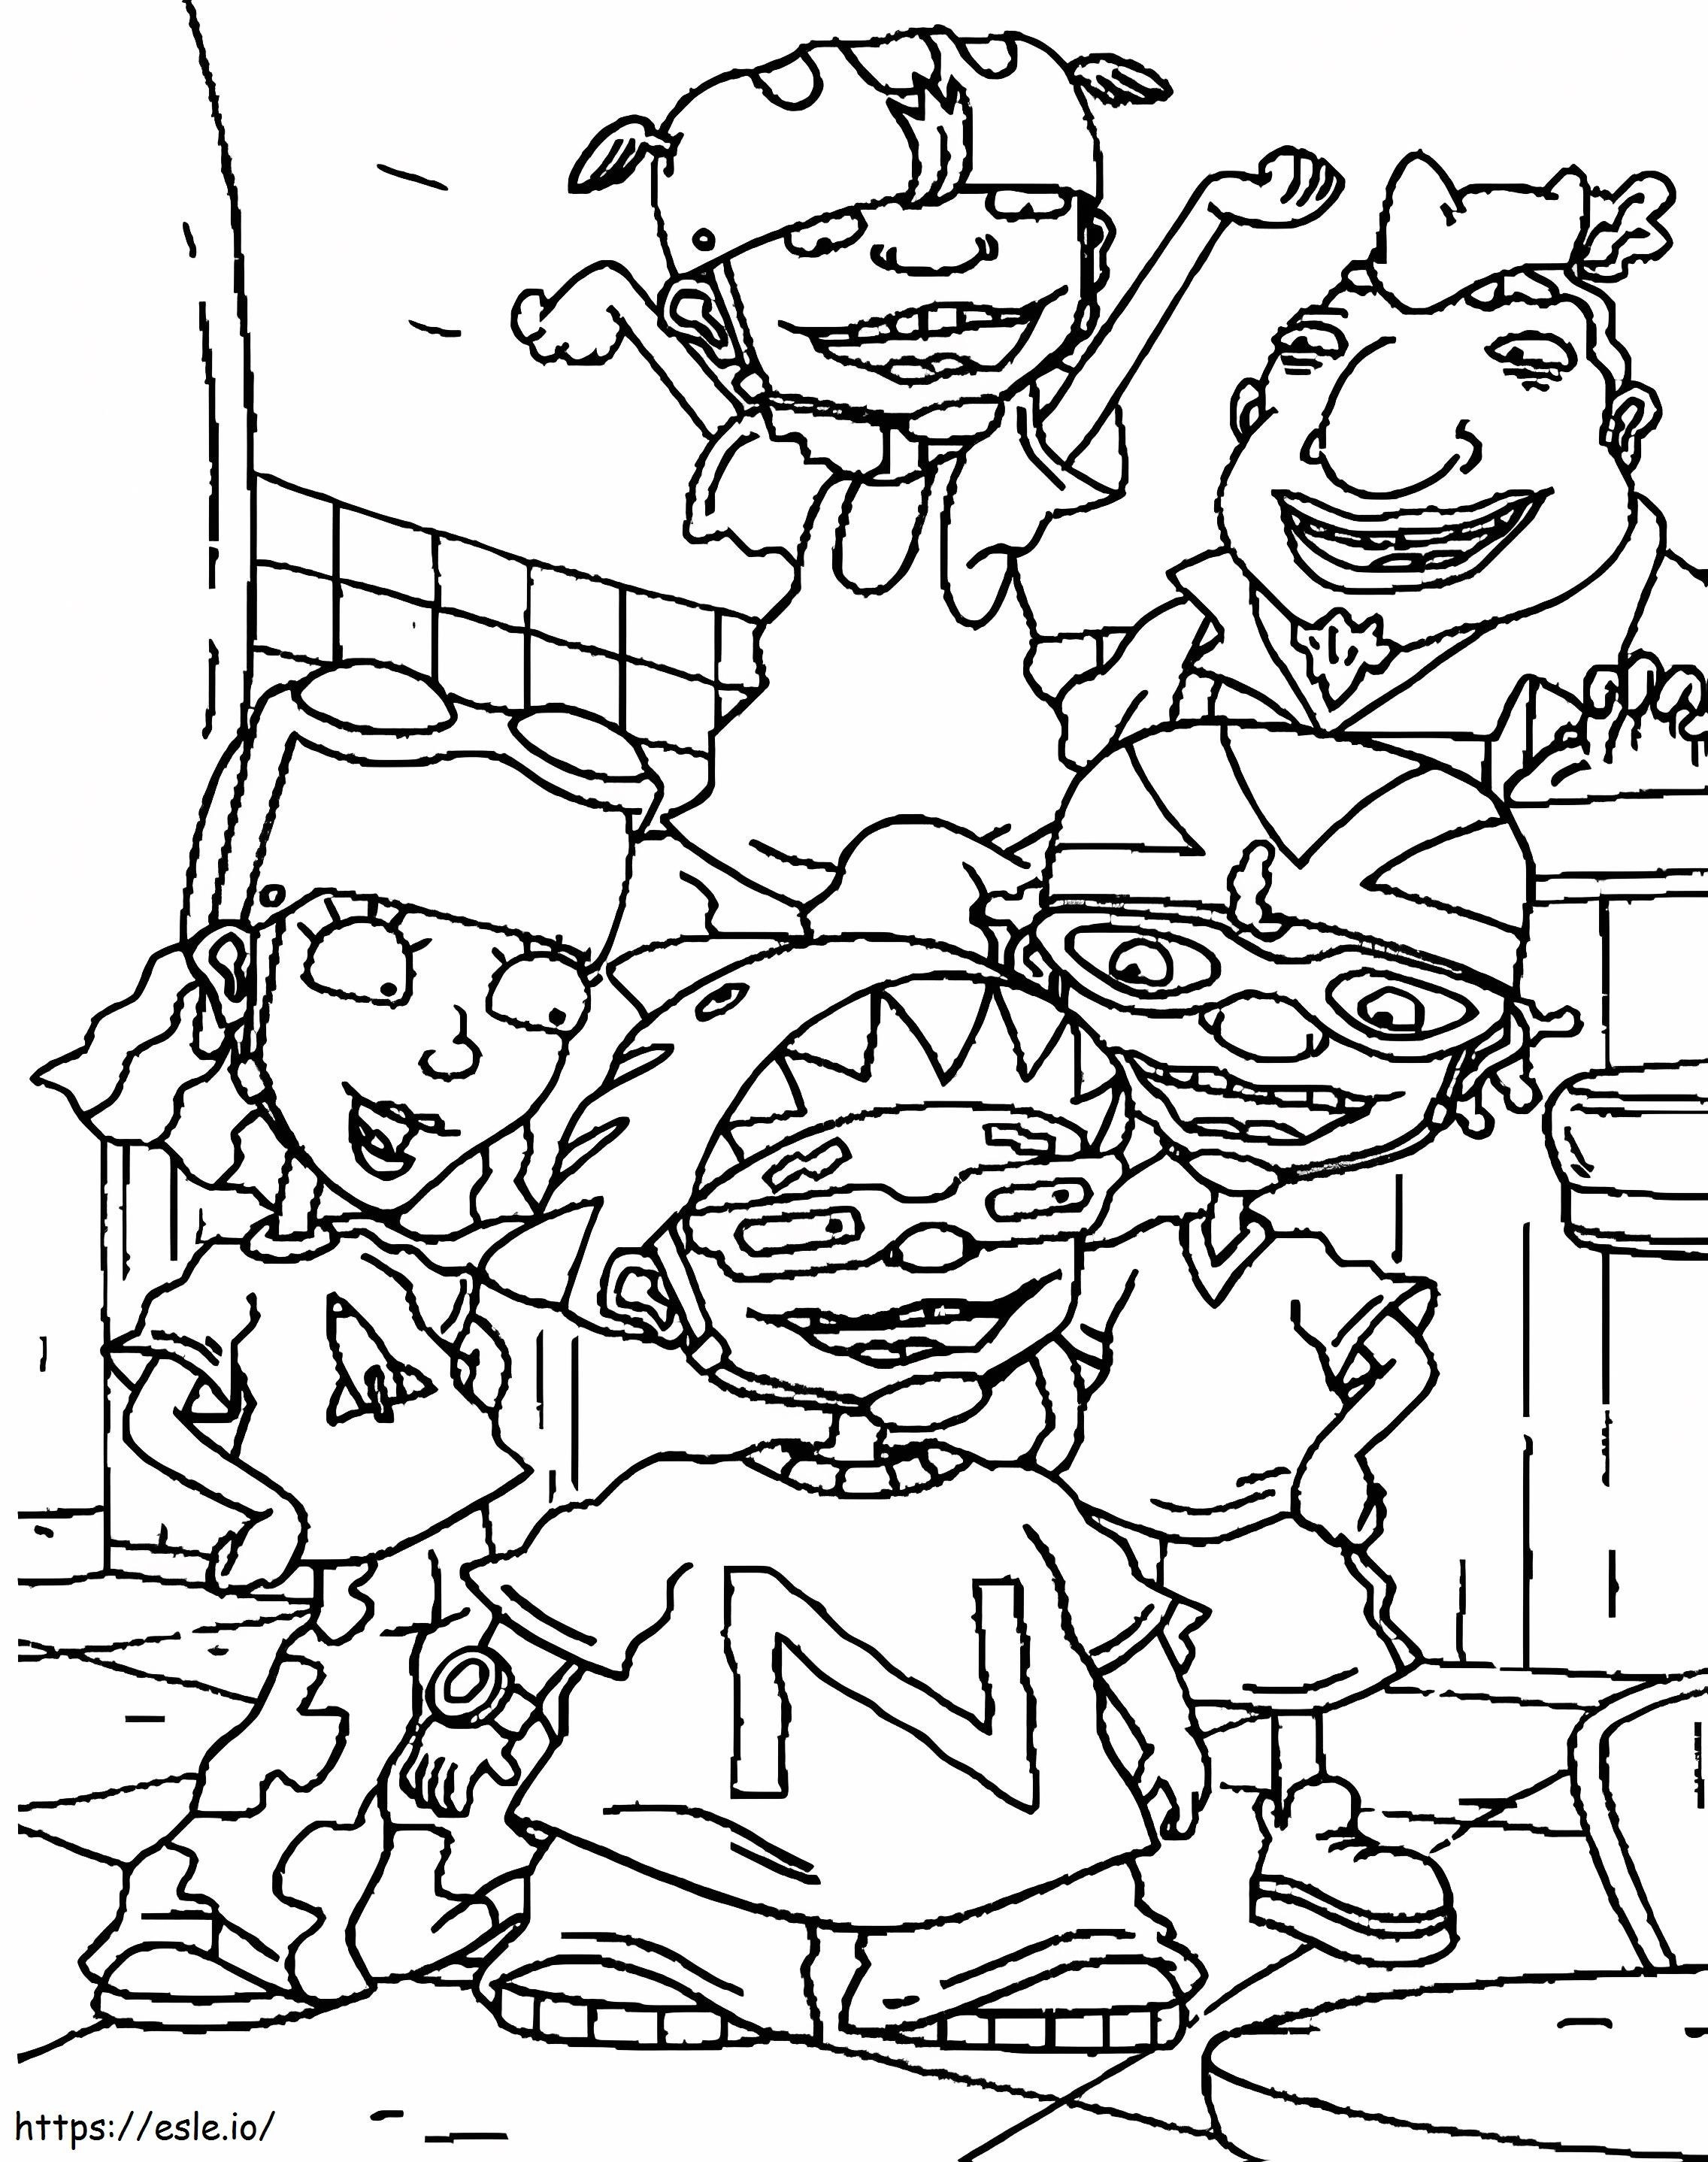 Rocket Power 1 coloring page